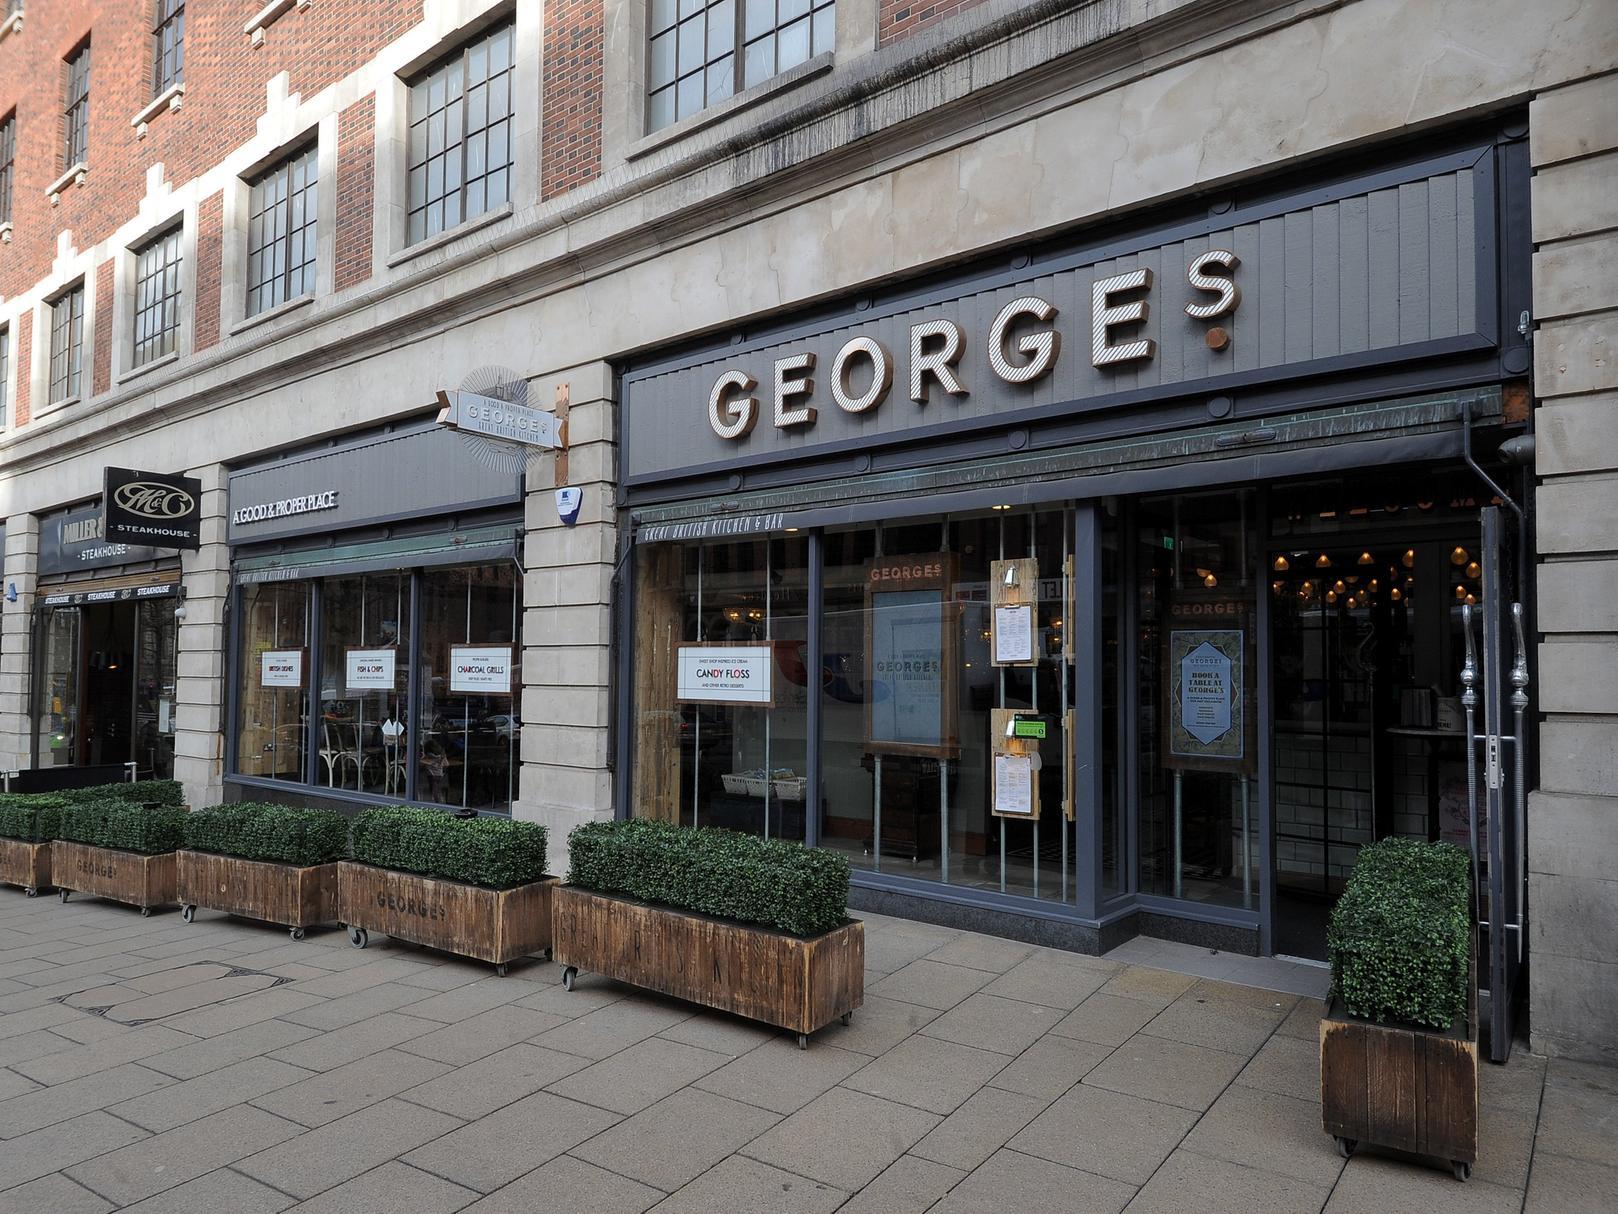 Georges Great British Kitchen, on the Headrow, came seventh on the list. As well as traditional fish and chips, they also offer something different like fish pakora.